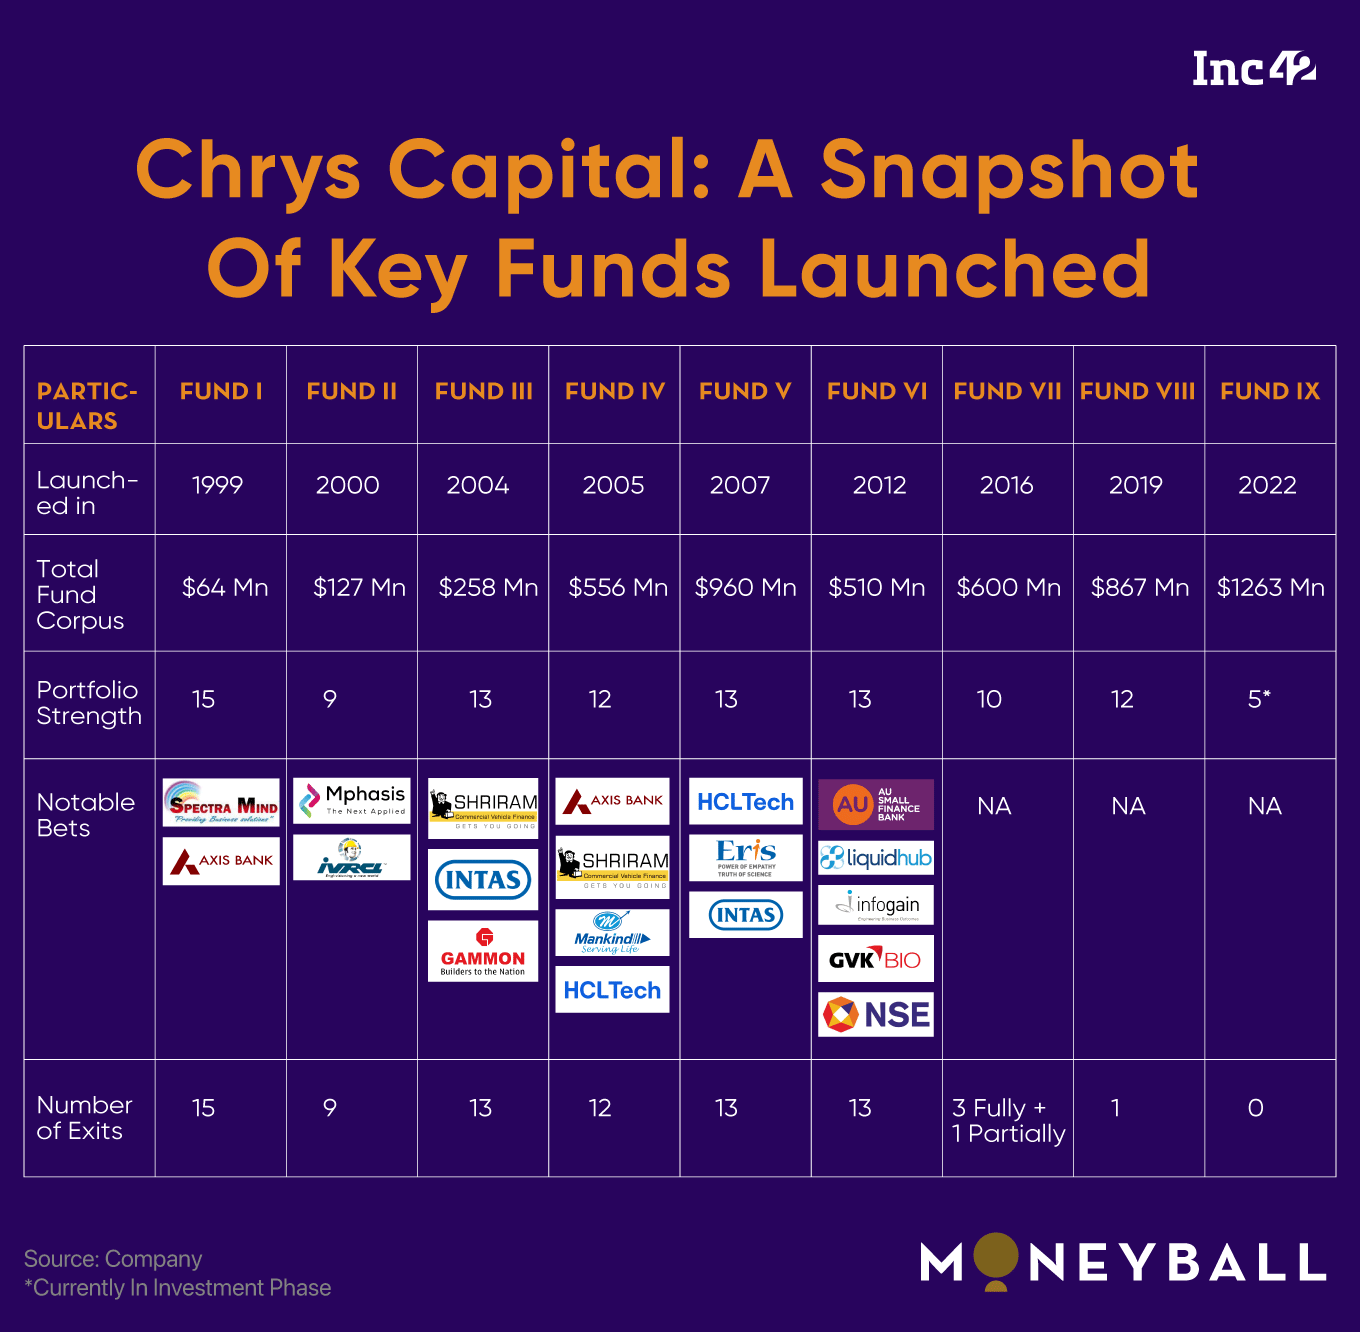 Until 2018, ChrysCapital primarily invested in sectors such as enterprise tech, financial services, healthcare & life sciences, consumer, and manufacturing